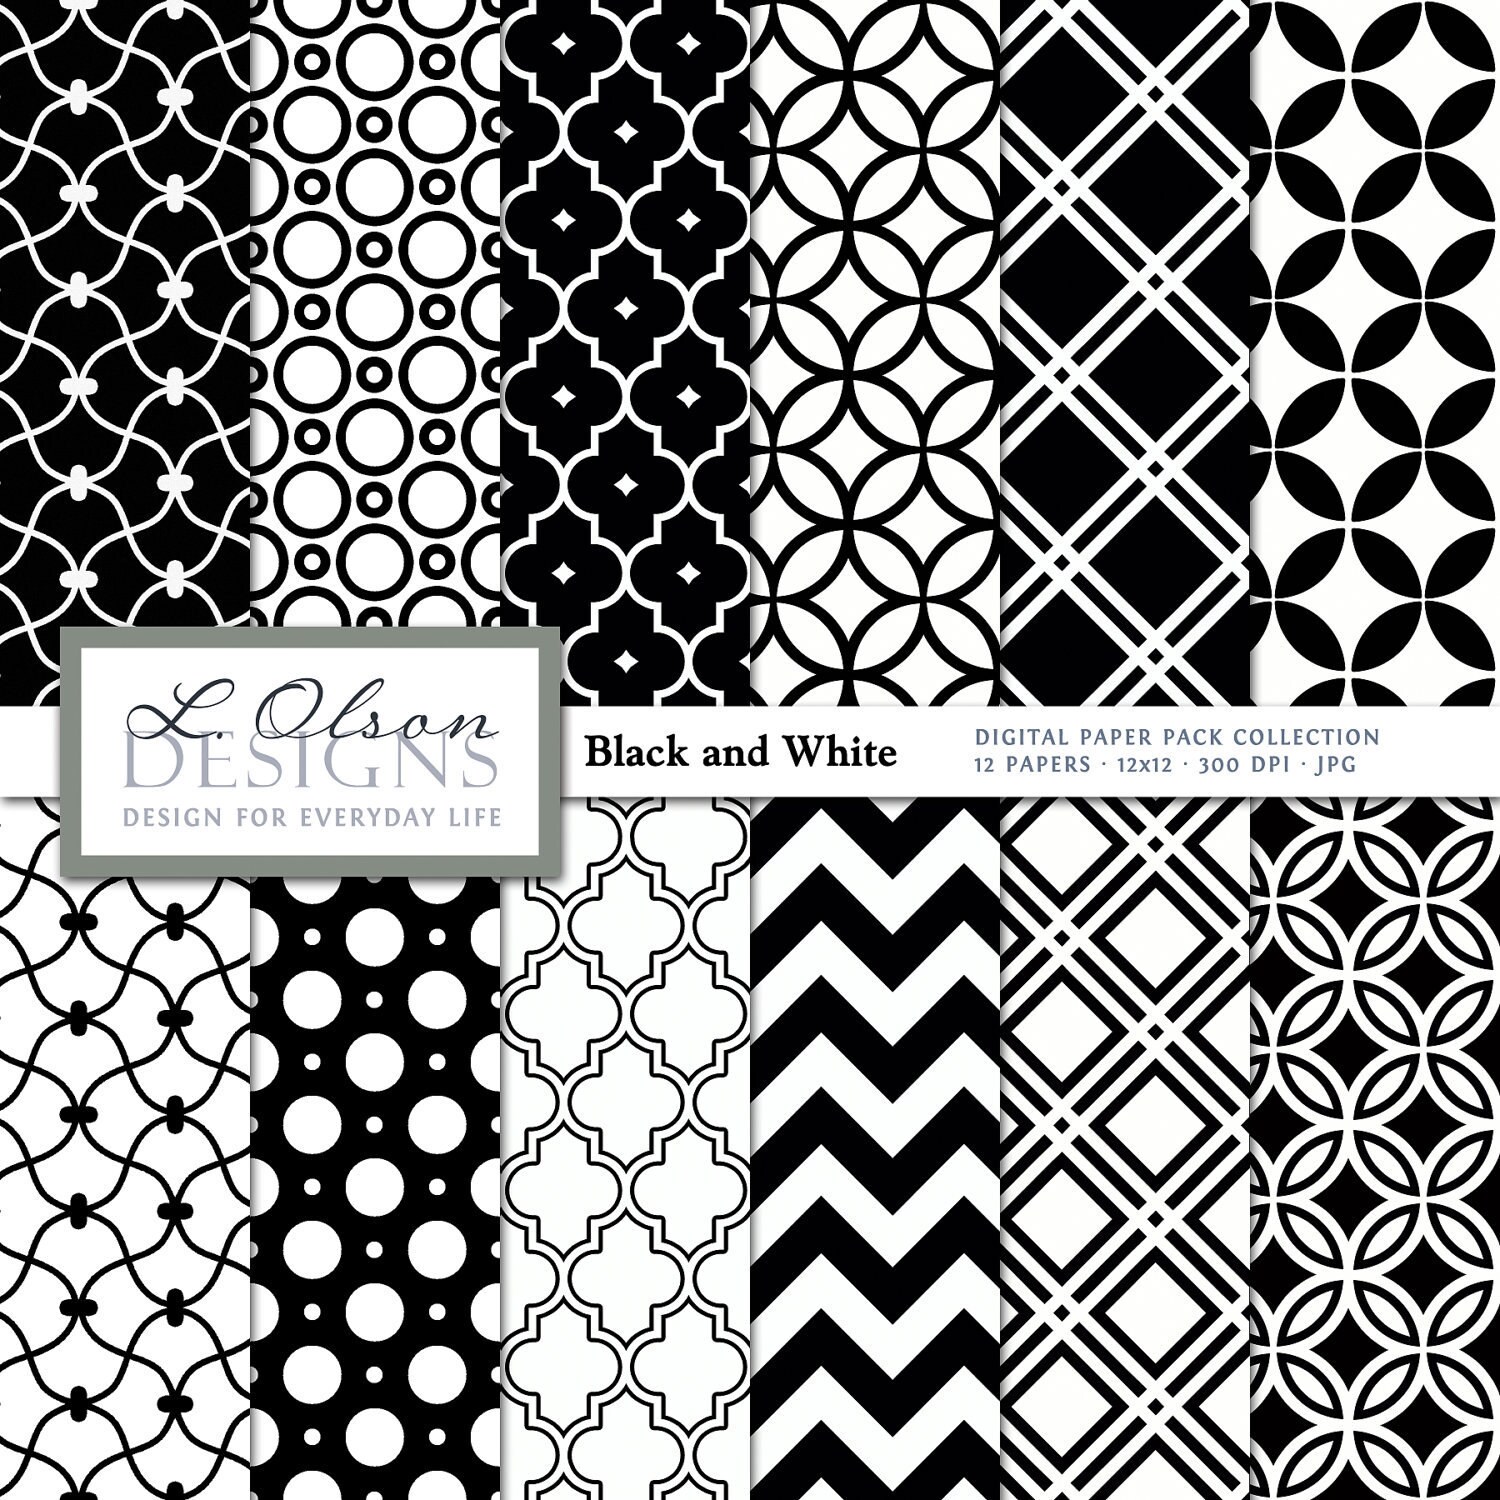 Black and White Paper Pack 12 digital paper patterns